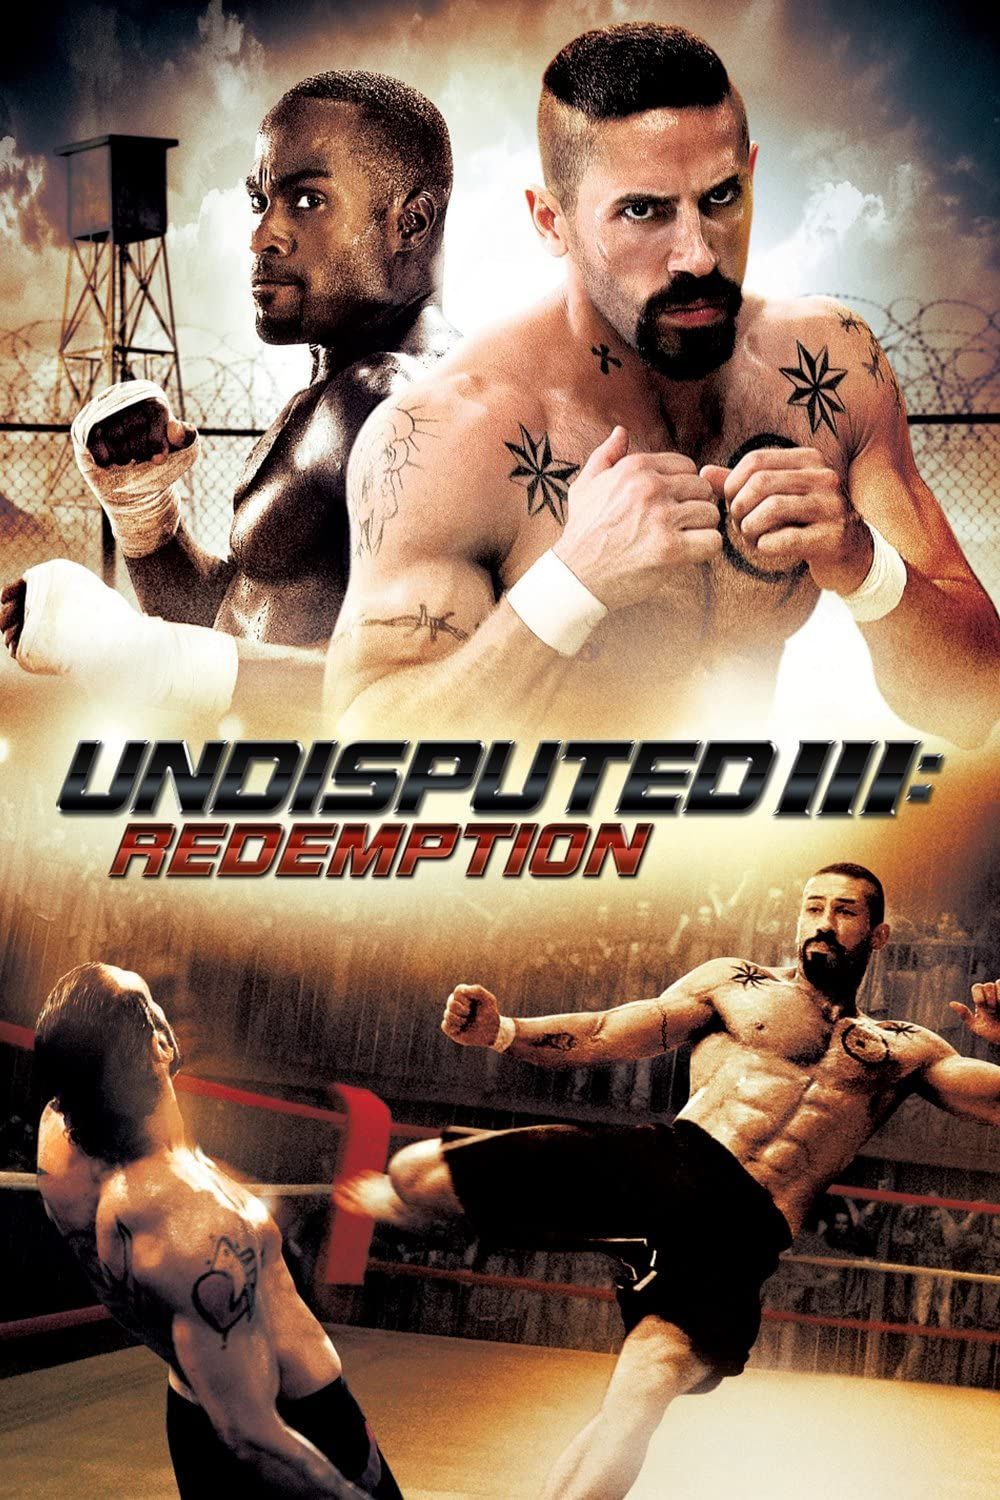 Undisputed 3: Redemption (2010) Hindi Dubbed BluRay download full movie